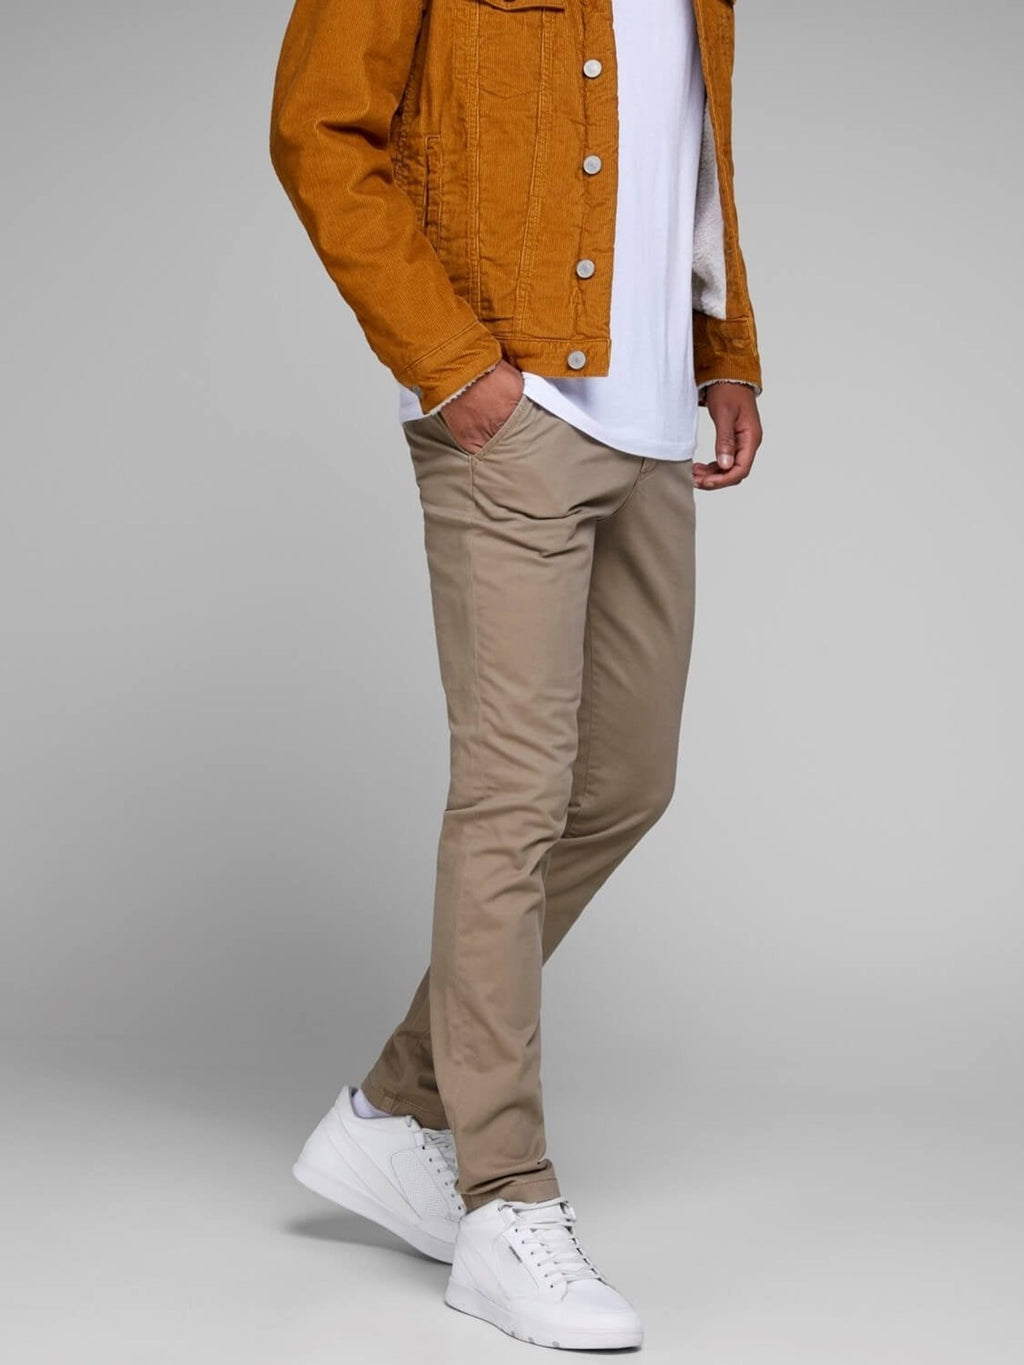 Marco Bowie chino pant - Brun